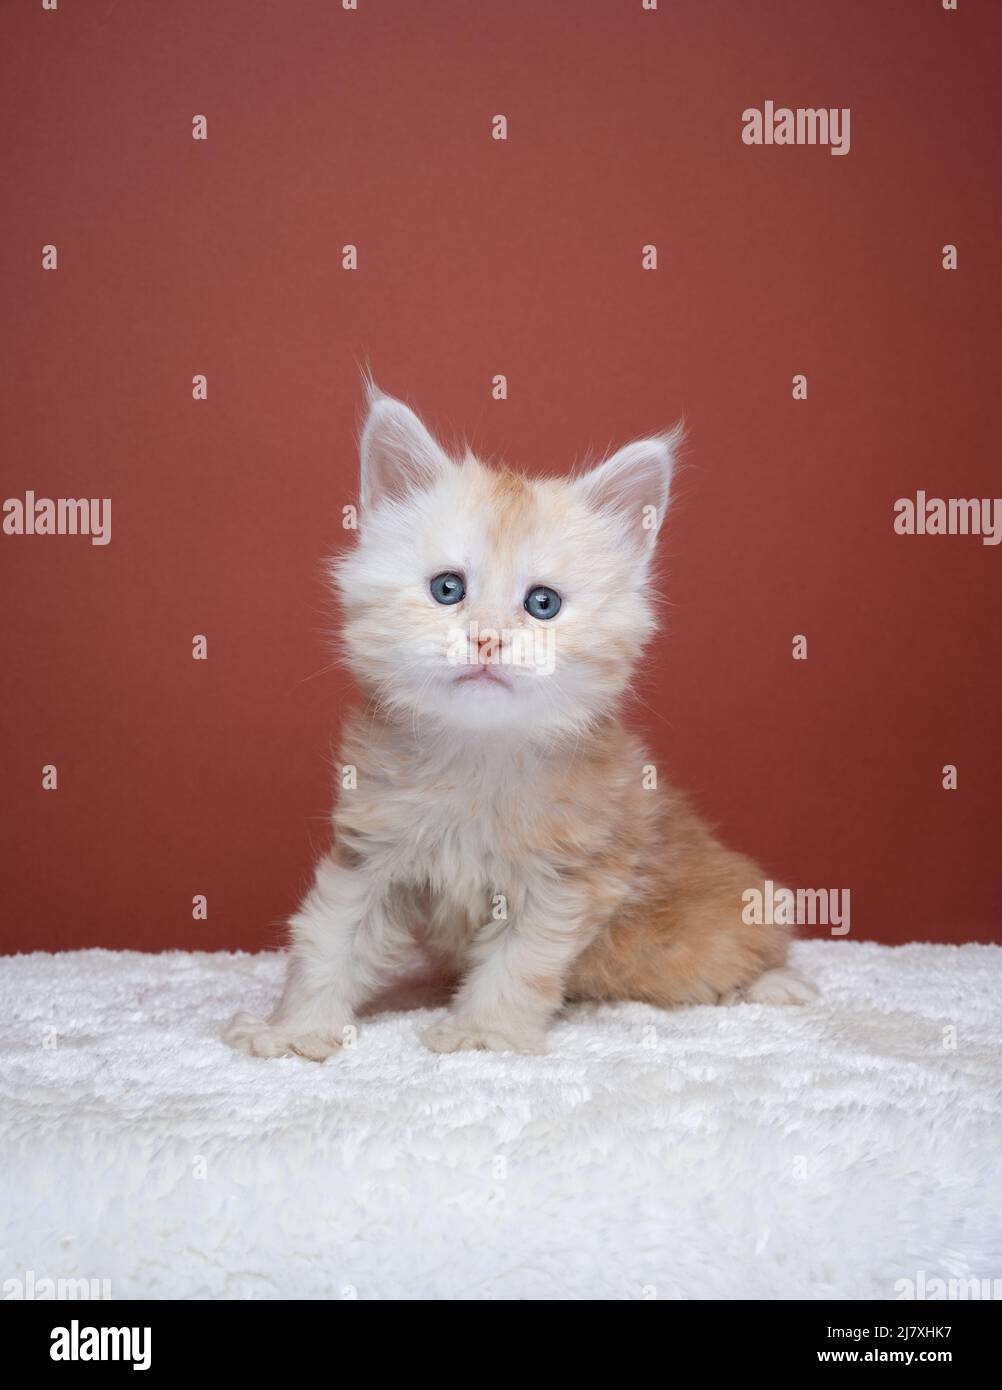 cute ginger maine coon kitten portrait looking at camera on red brown background with copy space Stock Photo